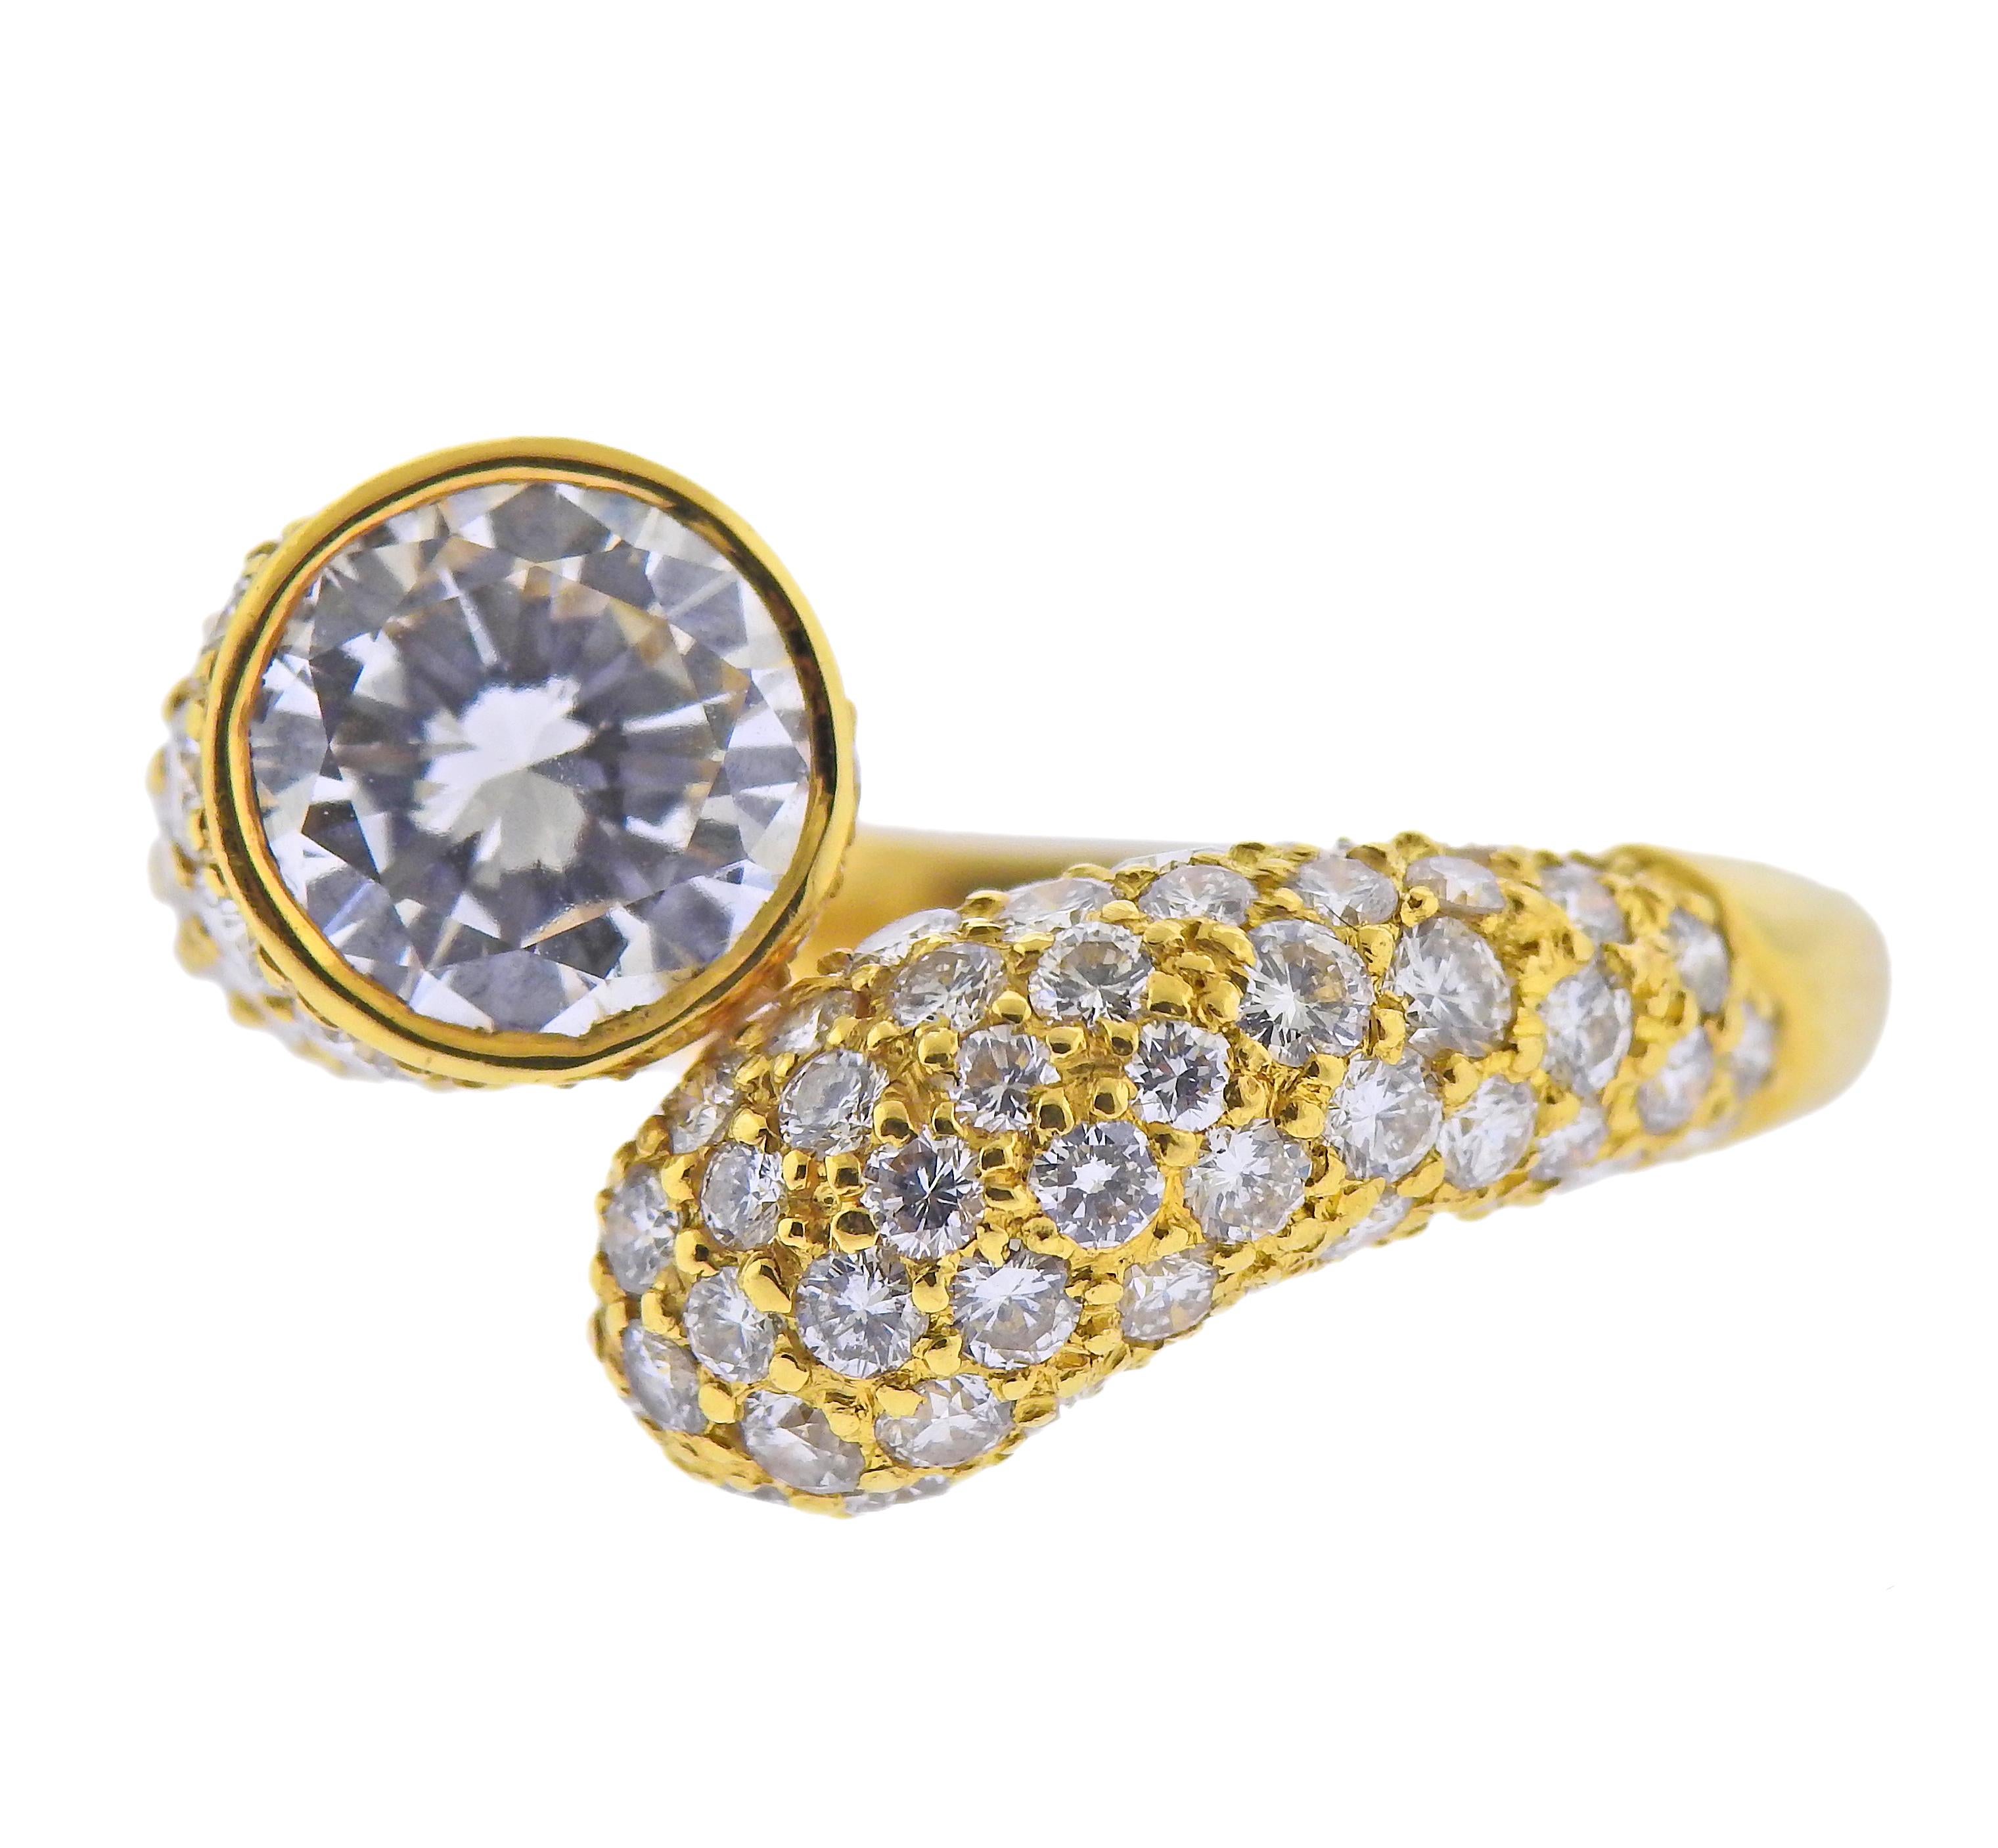 Harry Winstone 18k gold bypass ring, with a center GIA certified 2.24ct D/VVS2 diamond, surrounded with side approx. 1.70cts in diamonds. Ring size - 8.25, ring top is 17mm wide. Marked: 750 BR, Winston. Weight - 10.1 grams.